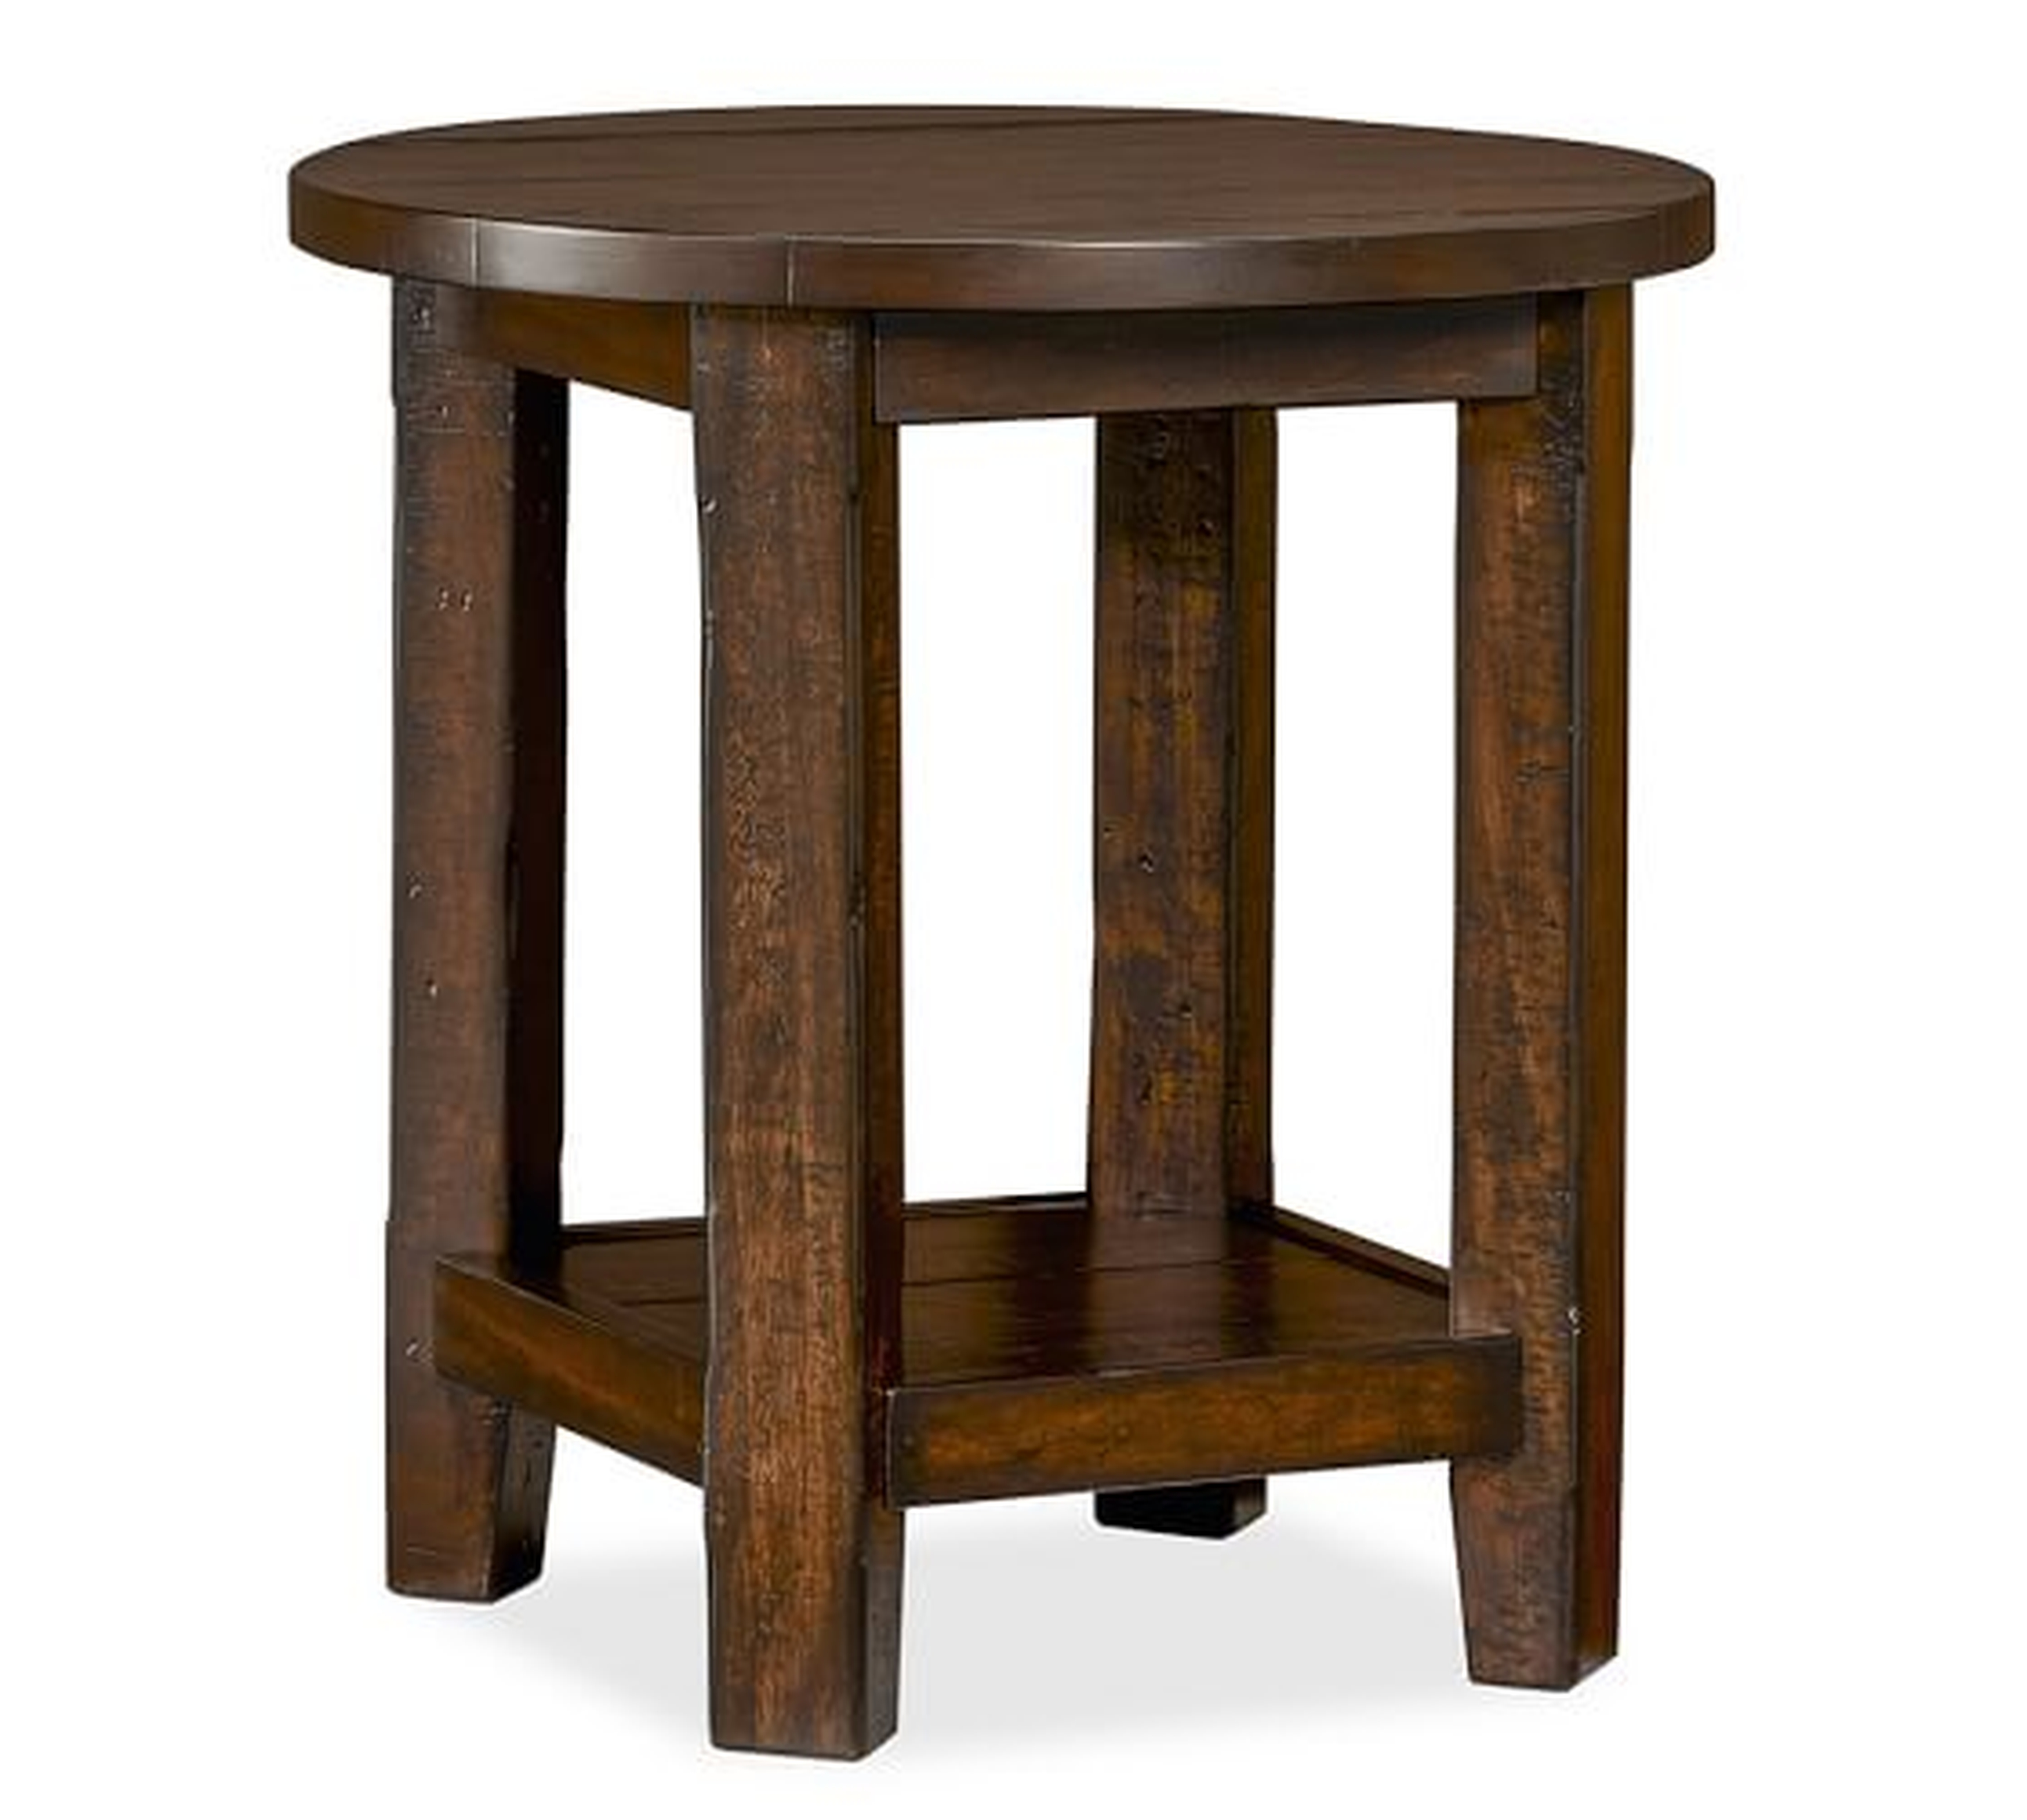 BENCHWRIGHT ROUND SIDE TABLE, RUSTIC MAHOGANY - Pottery Barn